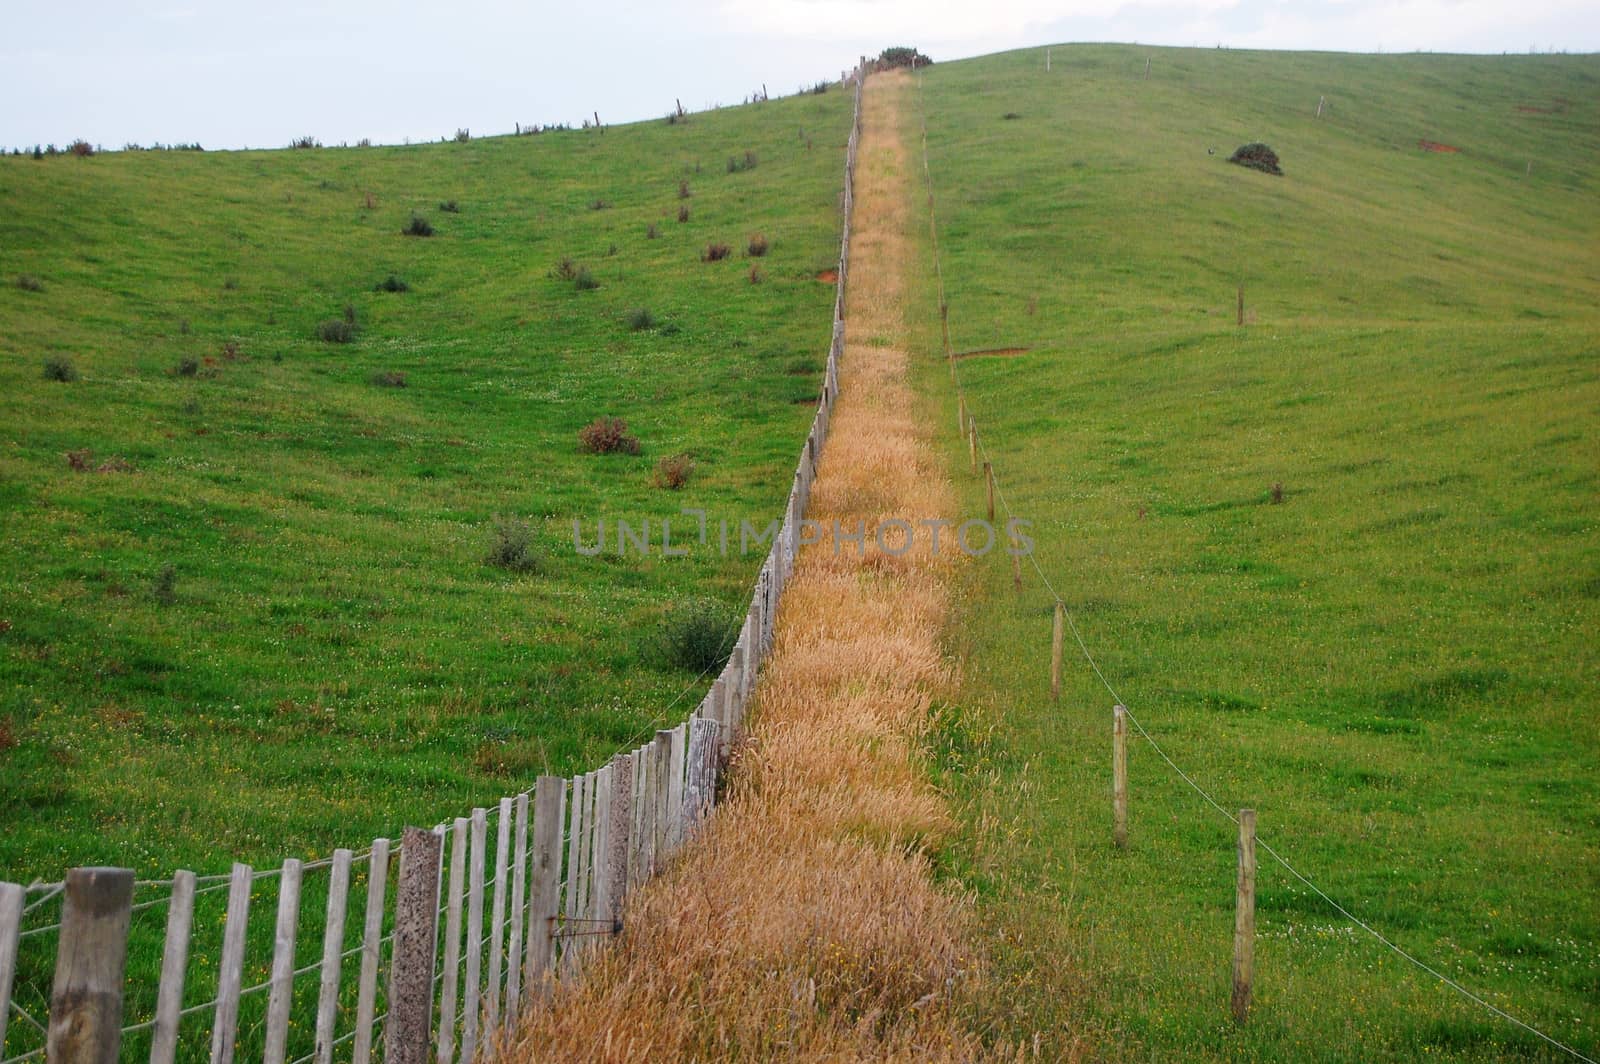 Fence at farm rural area, New Zealand